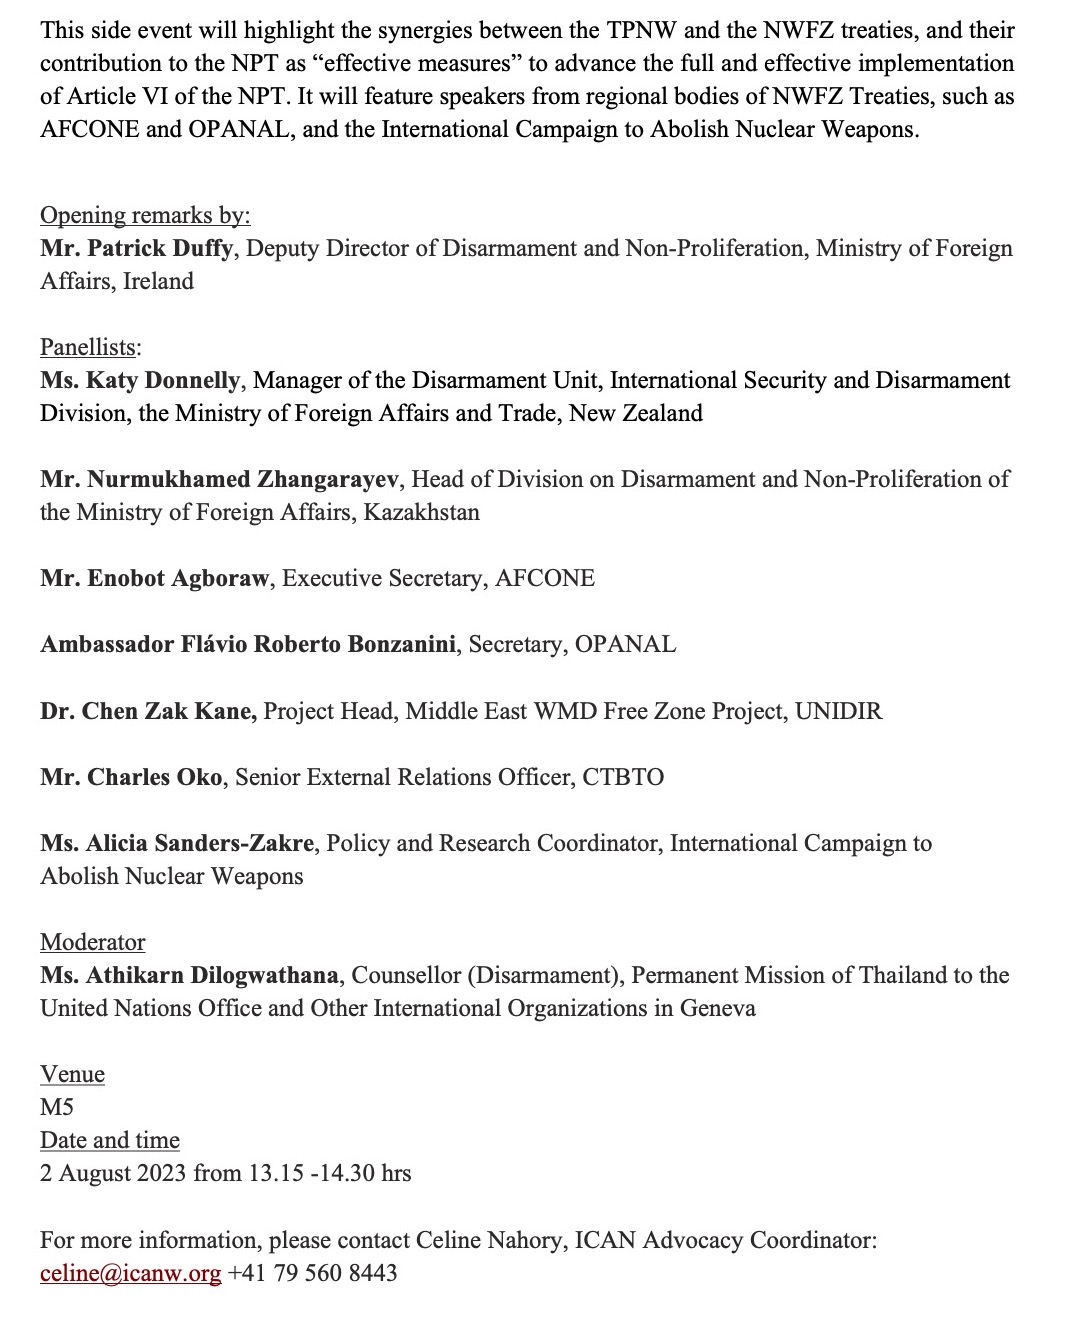 2Concept Note NPT PrepCom Side event on NPT TPNW NWFZ Complementarity 26 July 2023 with Moderator